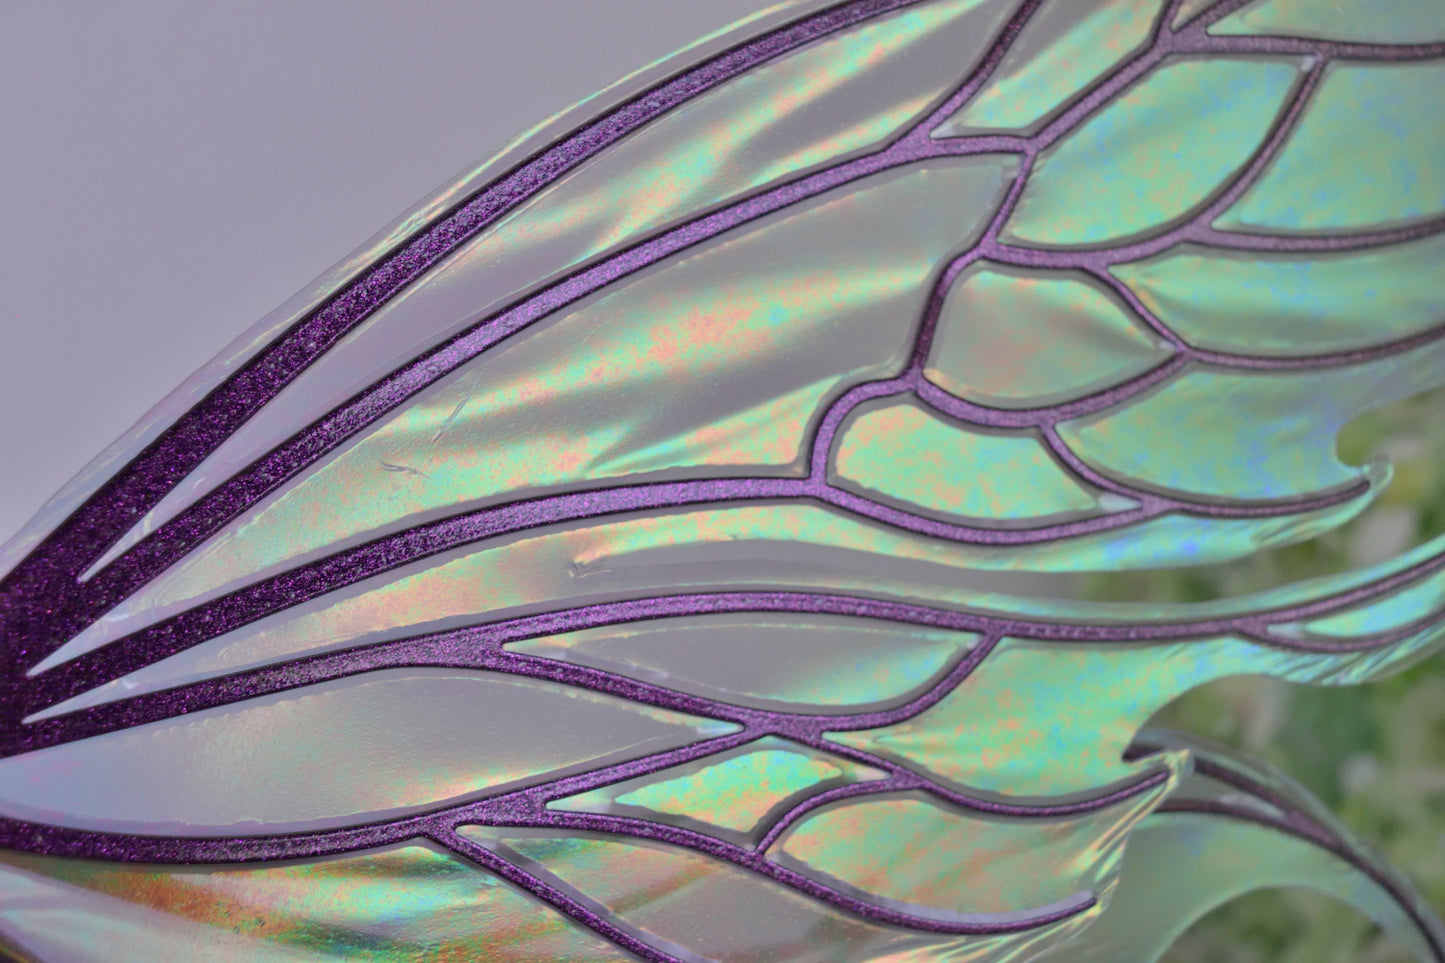 Aquatica Iridescent Convertible Fairy Wings in Patina with Chameleon Cherry Violet Glitter veins